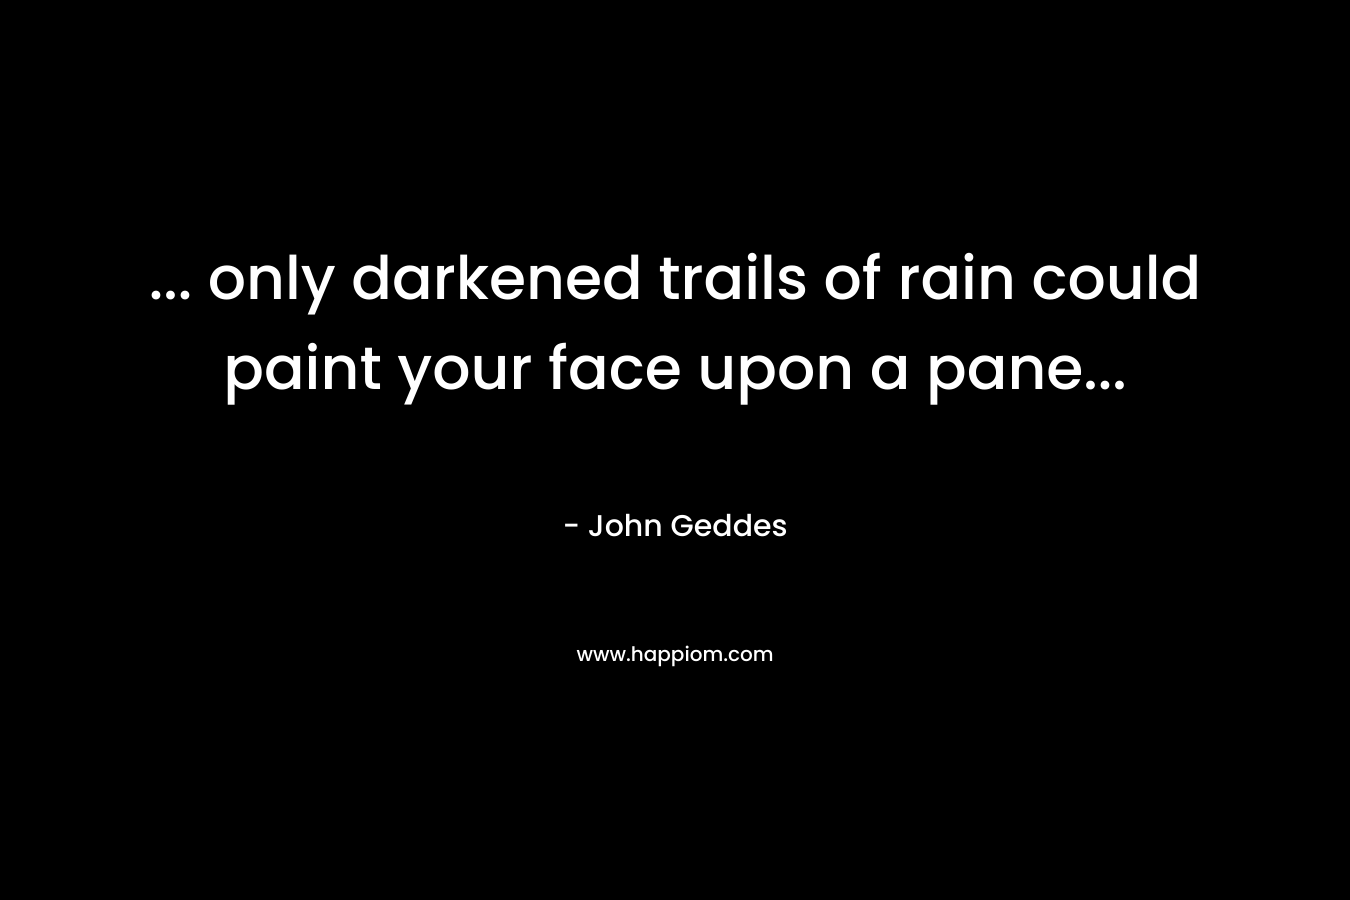 ... only darkened trails of rain could paint your face upon a pane...